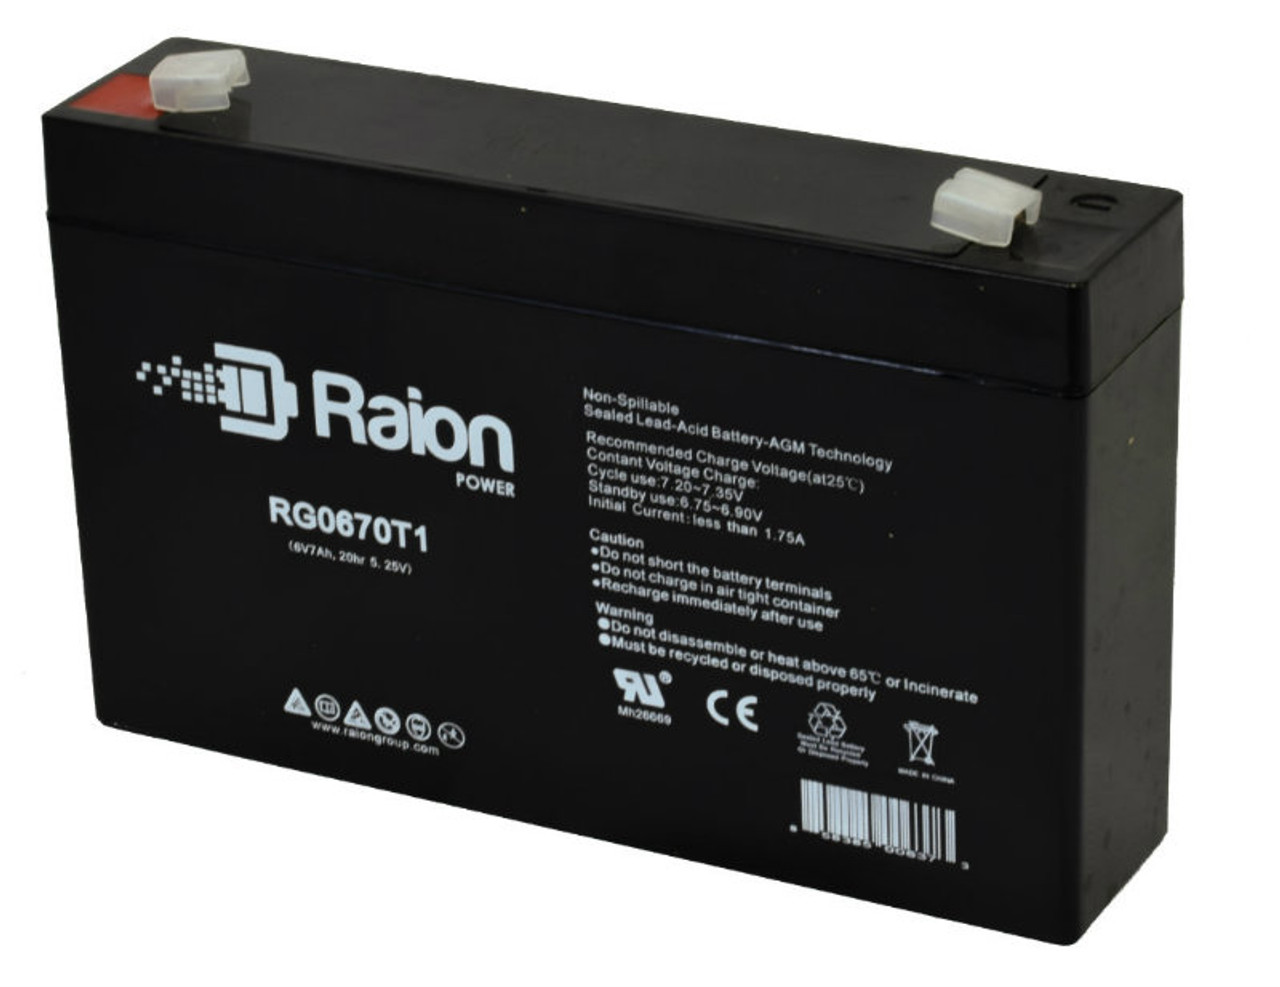 Raion Power RG0670T1 6V 7Ah Replacement Battery Cartridge for Philips 100 Medical Equipment